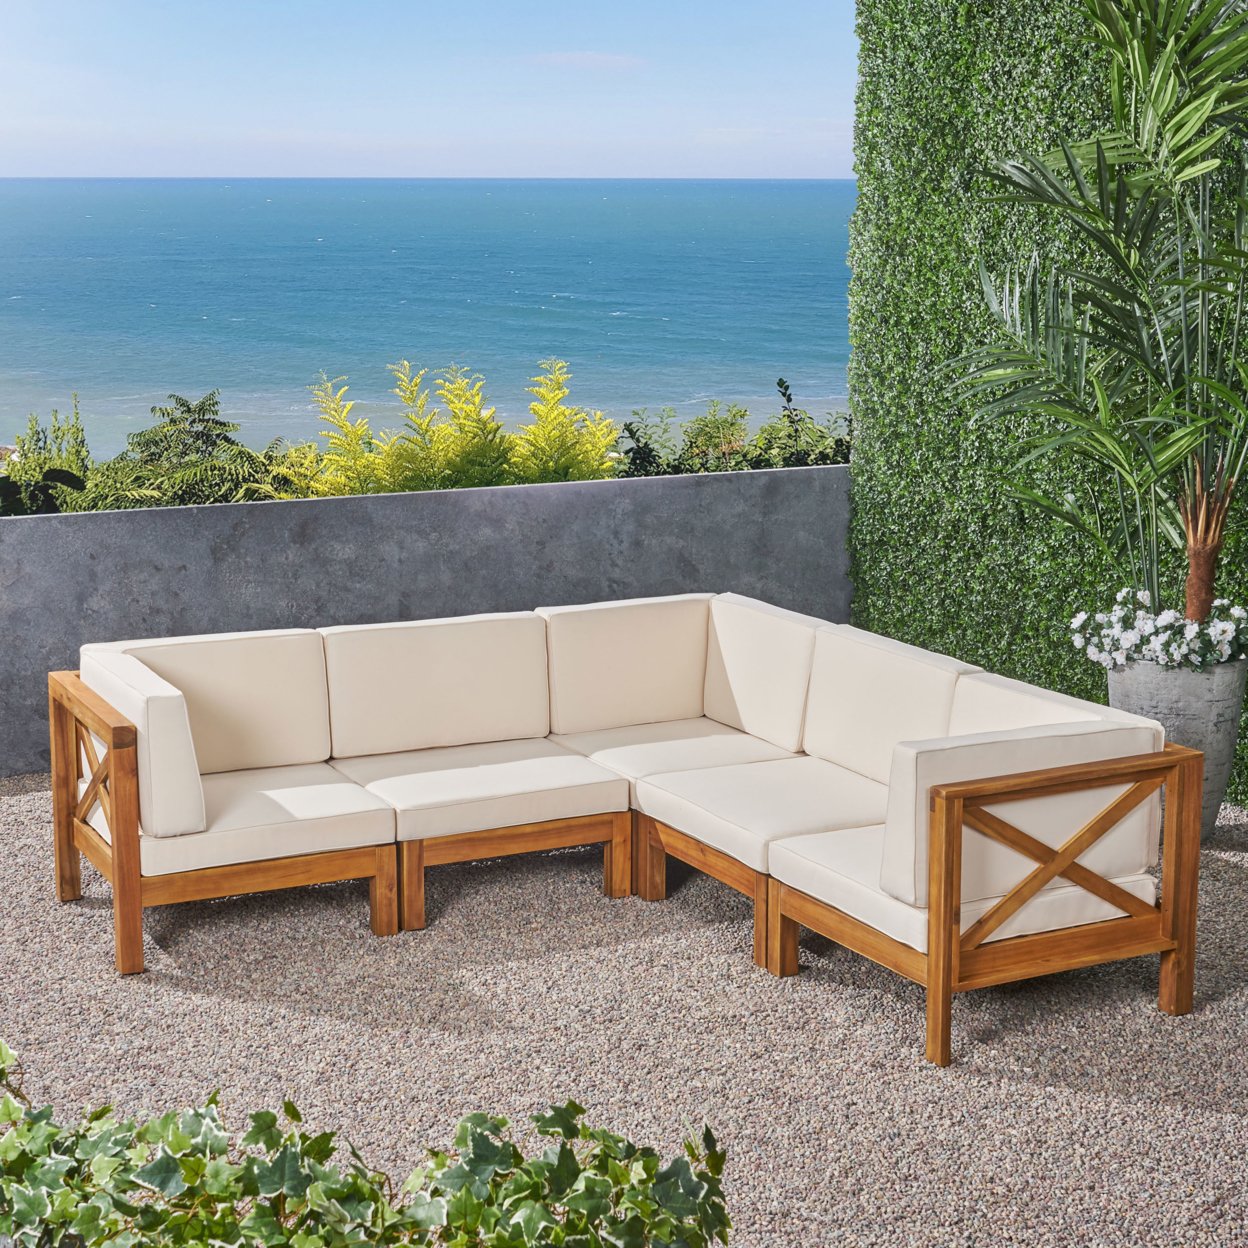 Brava Outdoor Acacia Wood 5 Seater Sectional Sofa Set With Water-Resistant Cushions - Teak Finish + Red